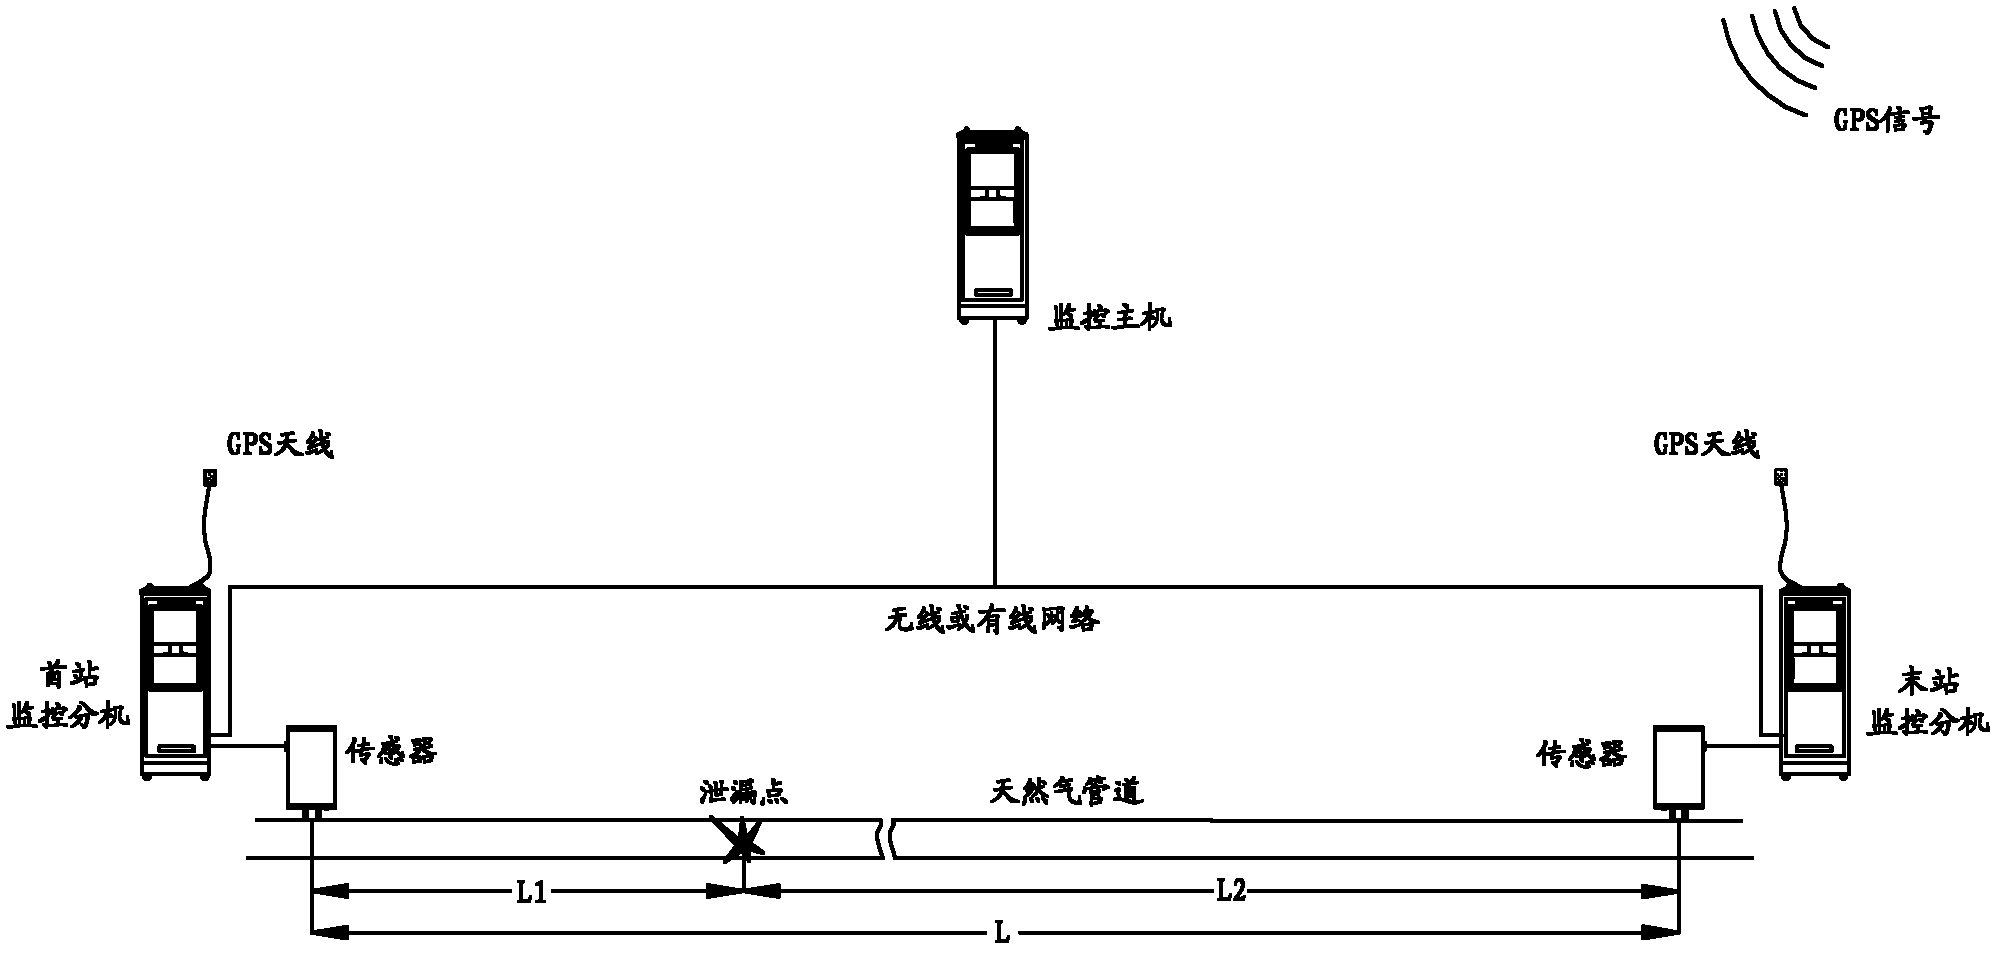 Monitoring and positioning device for leakage of gas delivery pipe